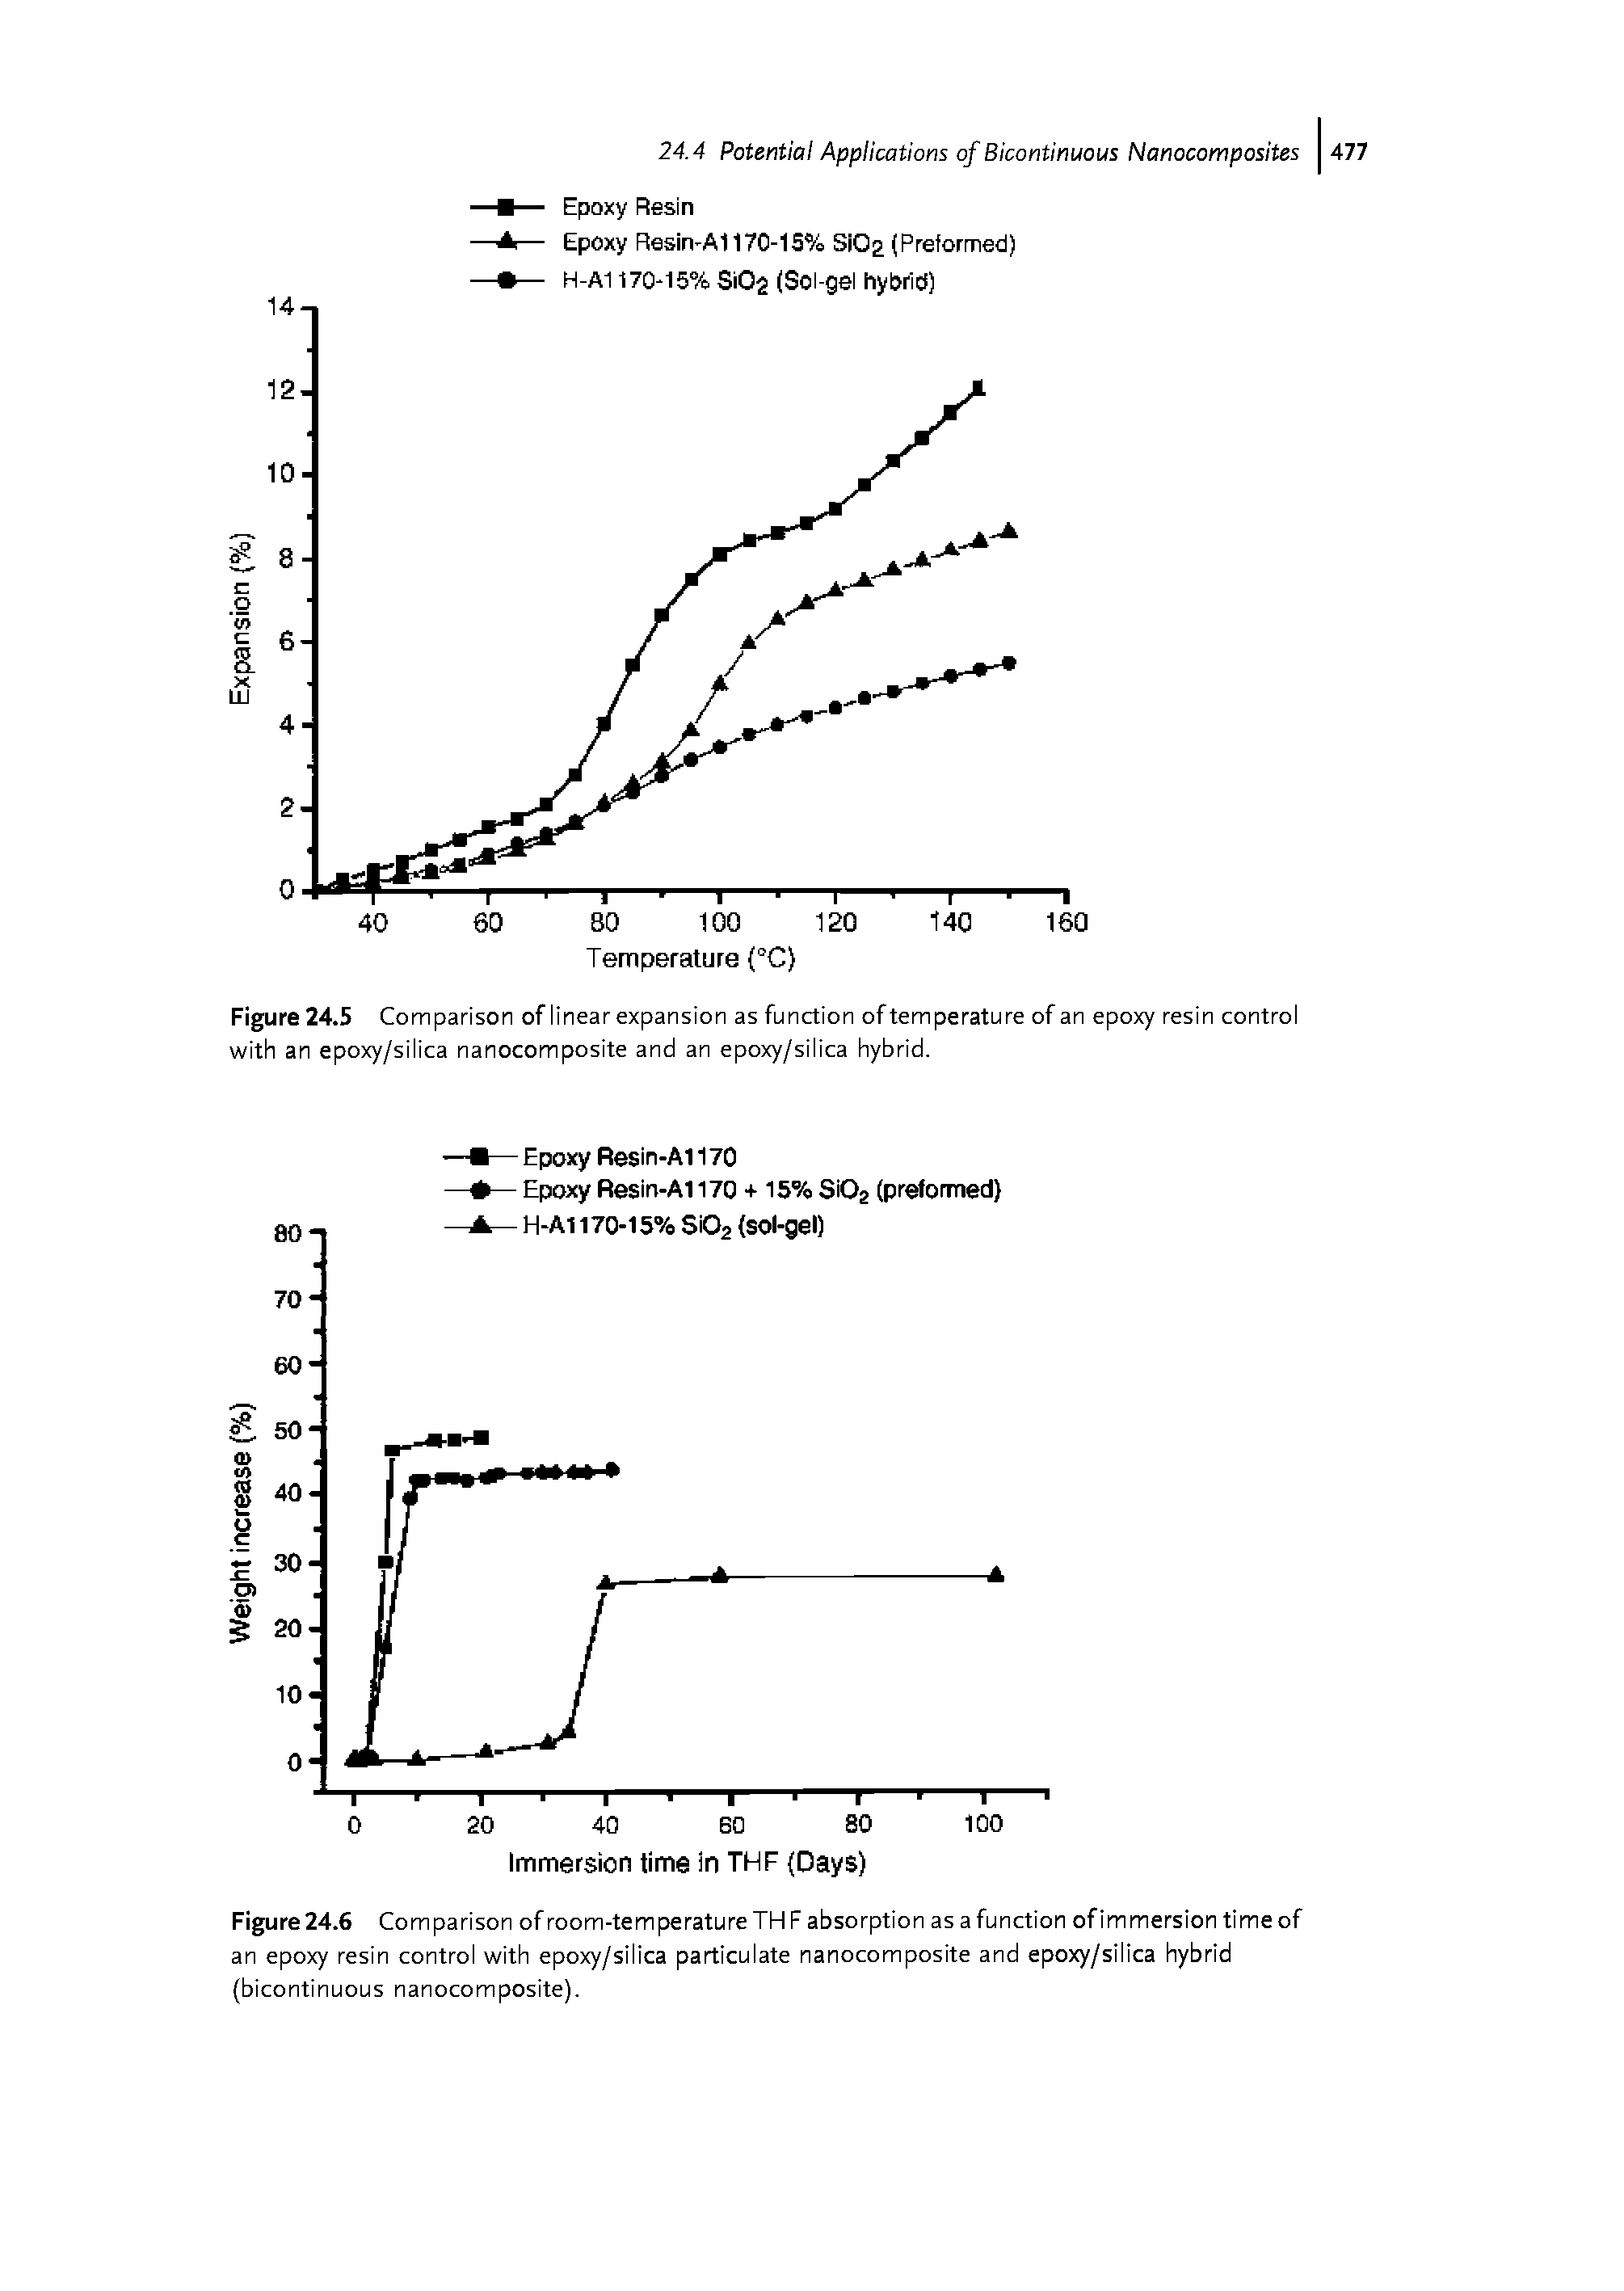 Figure 24.6 Comparison of room-temperature TH F absorption as a function ofimmersion timeof an epoxy resin control with epoxy/silica particulate nanocomposite and epoxy/silica hybrid (bicontinuous nanocomposite).